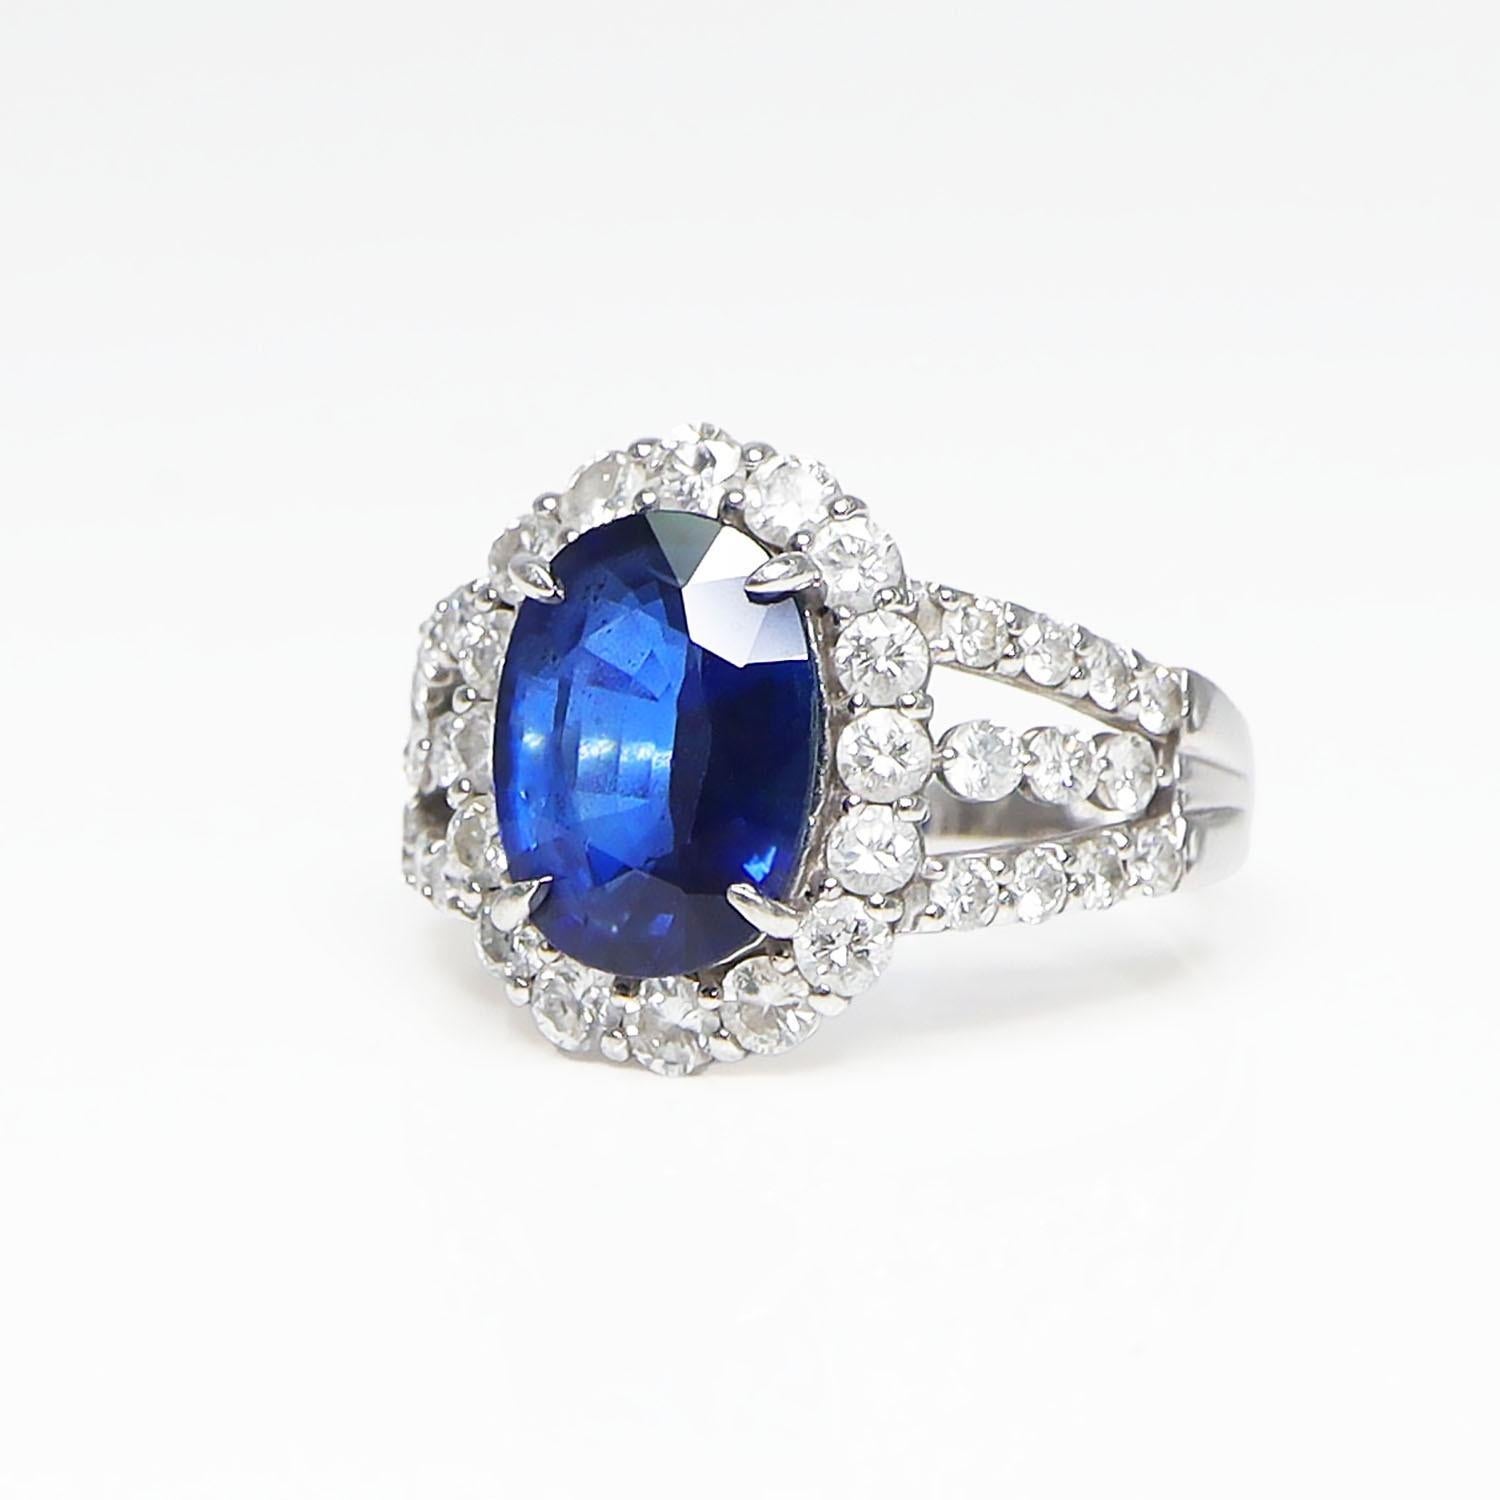 Contemporary Certified PT950 4.82 ct Unheated Royal Blue Sapphire Engagement Ring For Sale